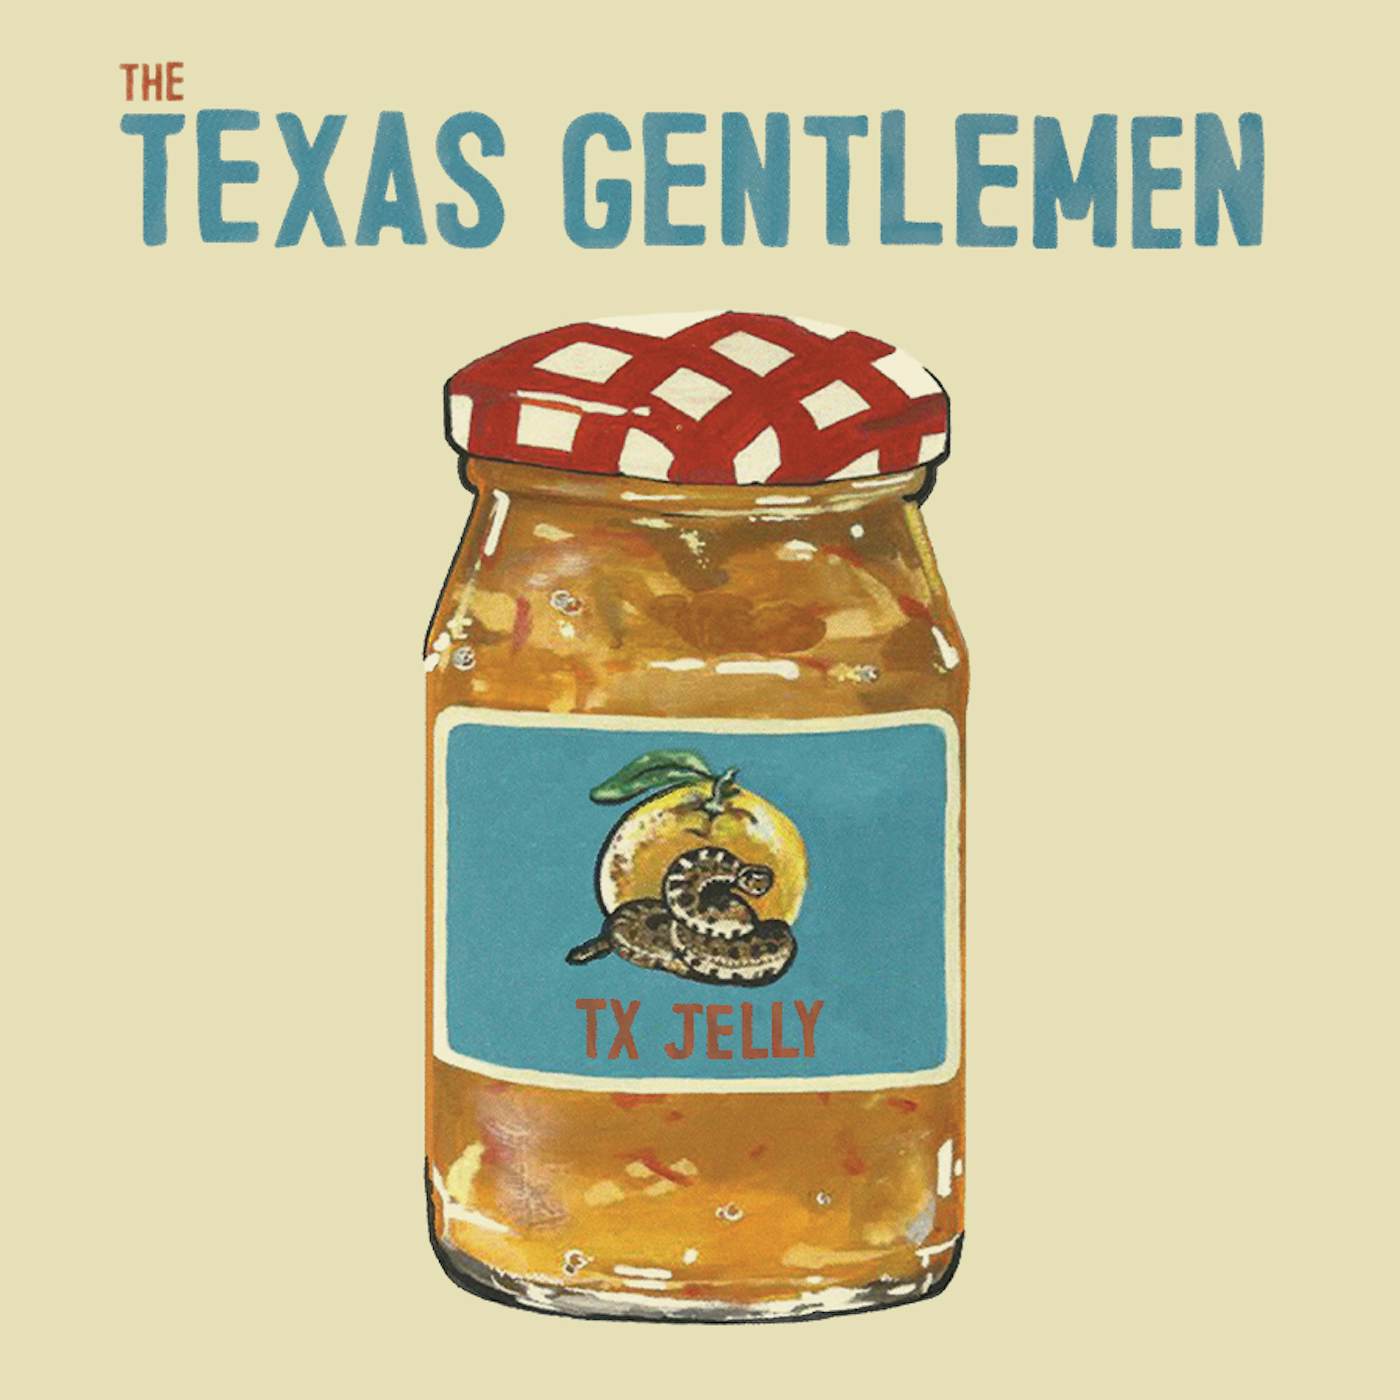 The Texas Gentlemen TX JELLY - Limited Edition 150 Gram Colored Vinyl Record